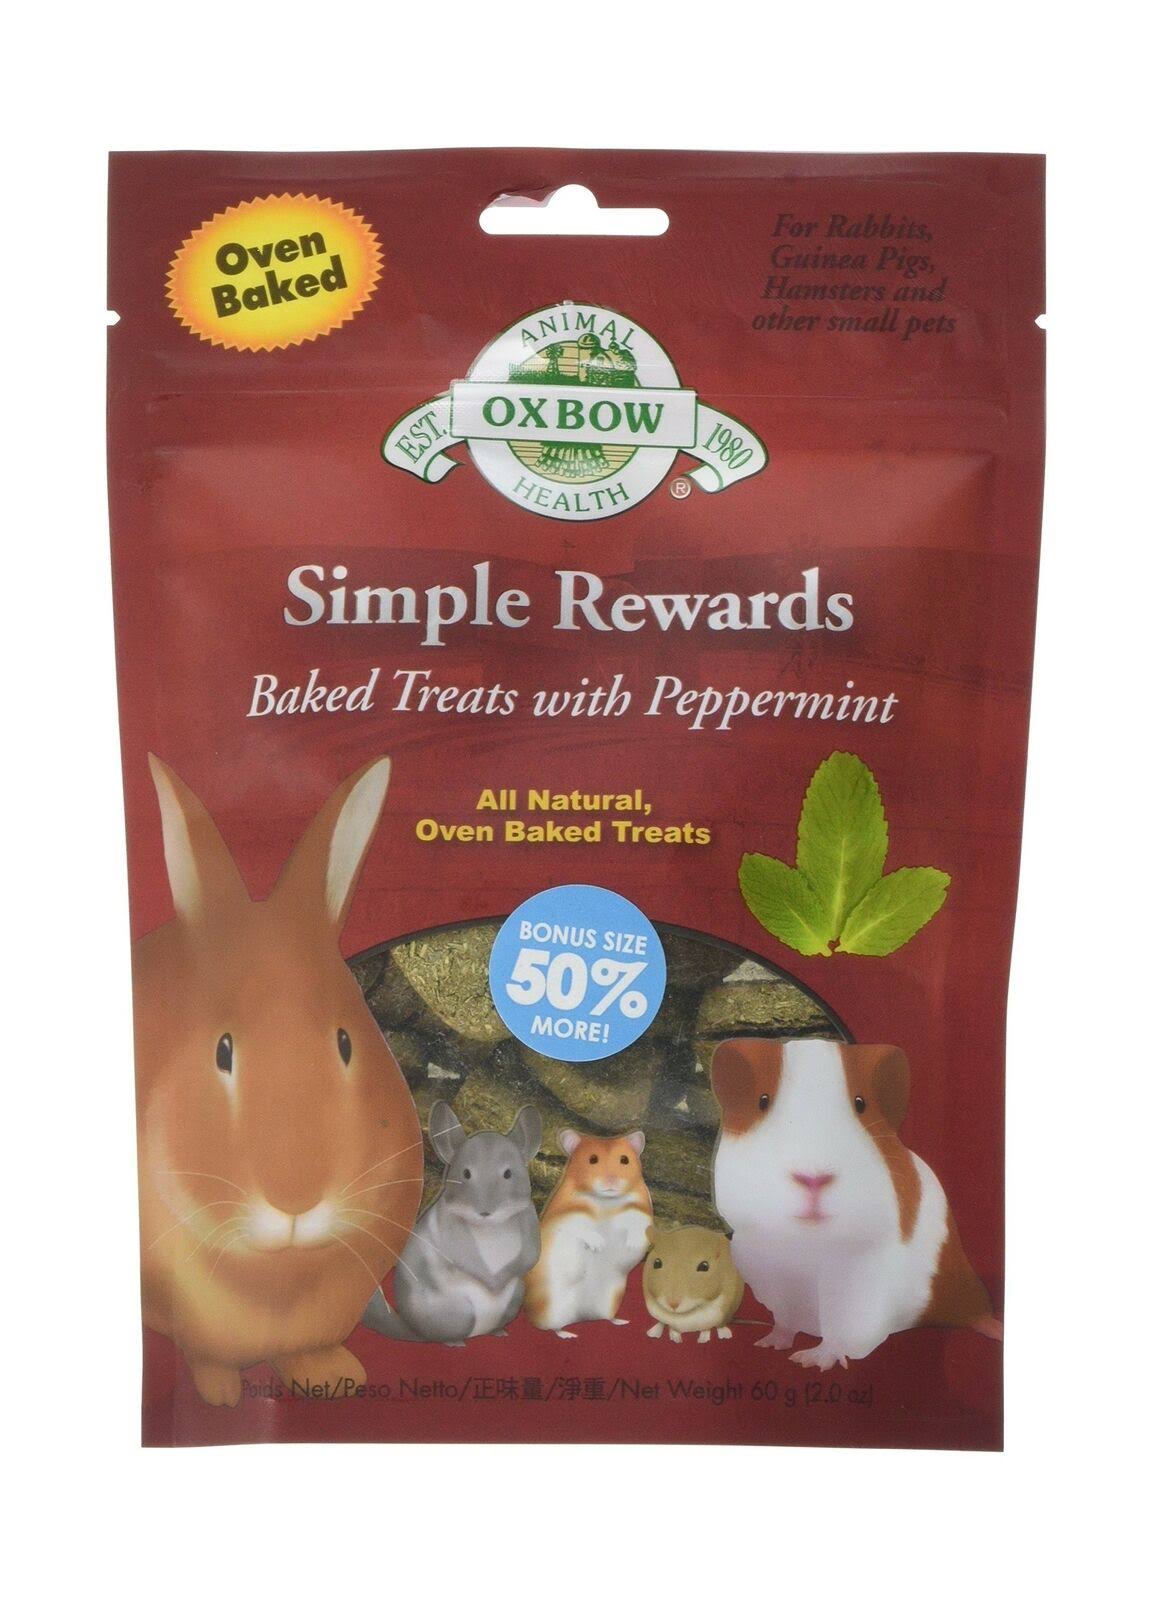 Oxbow Simple Rewards Oven Baked Treats - Peppermint, 57g